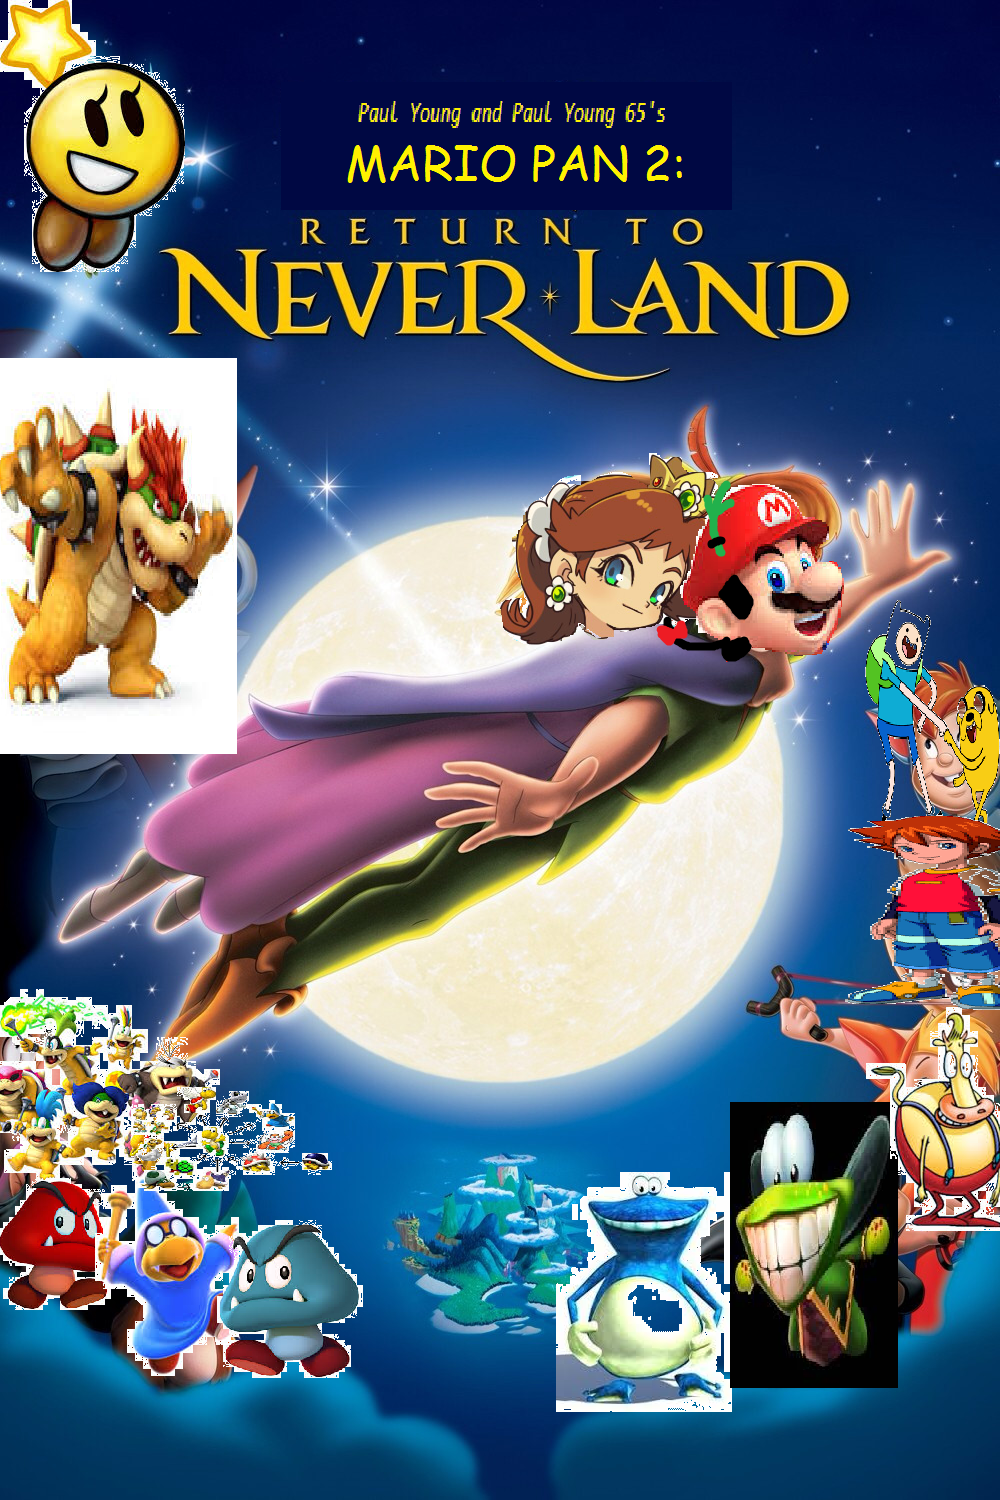 Mario Pan 2: Return to Neverland (Paul Young and Paul Young 65's Style), The Parody Wiki